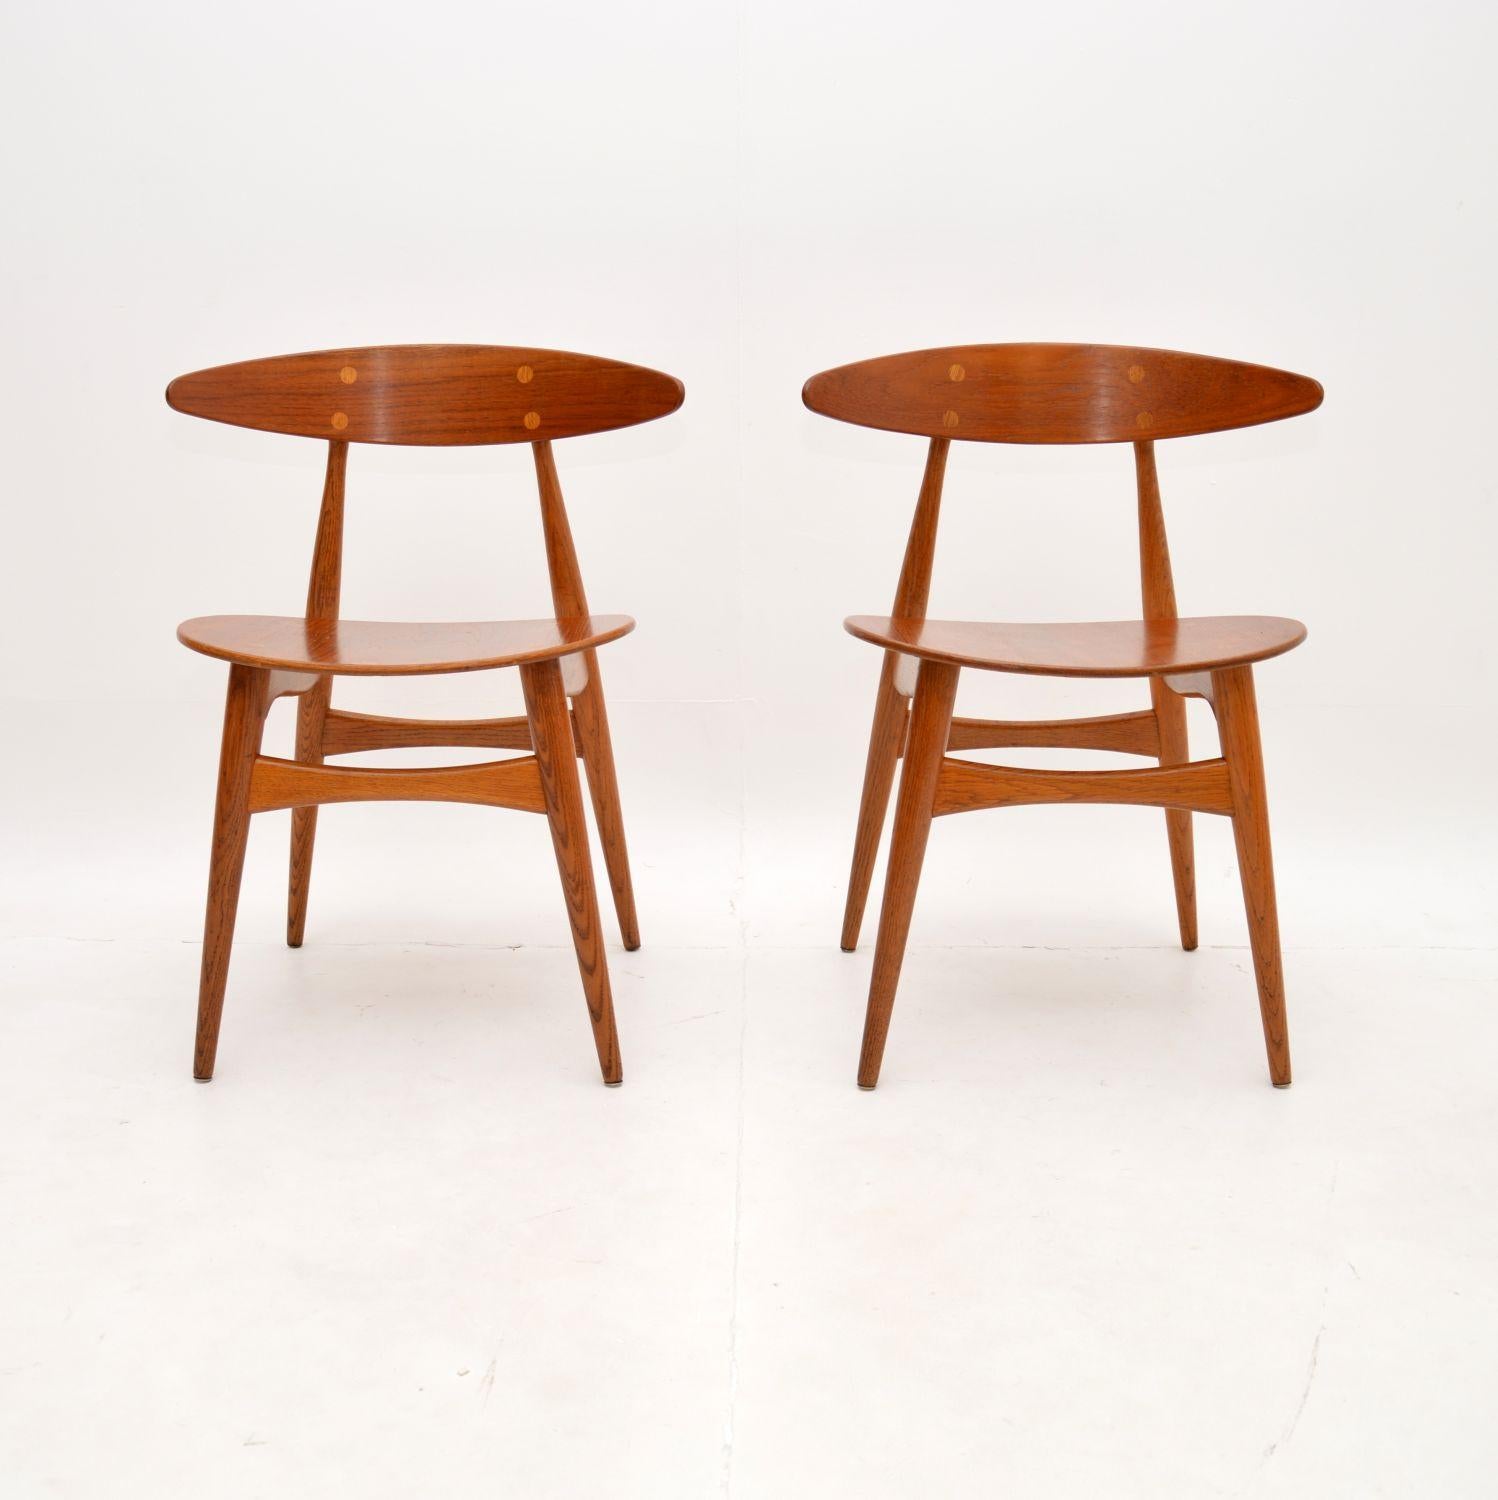 A stunning and iconic pair of Danish CH33 chairs by Hans Wegner for Carl Hansen & Son. They are original vintage models and they date from the 1960’s.

The quality is outstanding, they are beautifully crafted with solid oak frames, the seats and